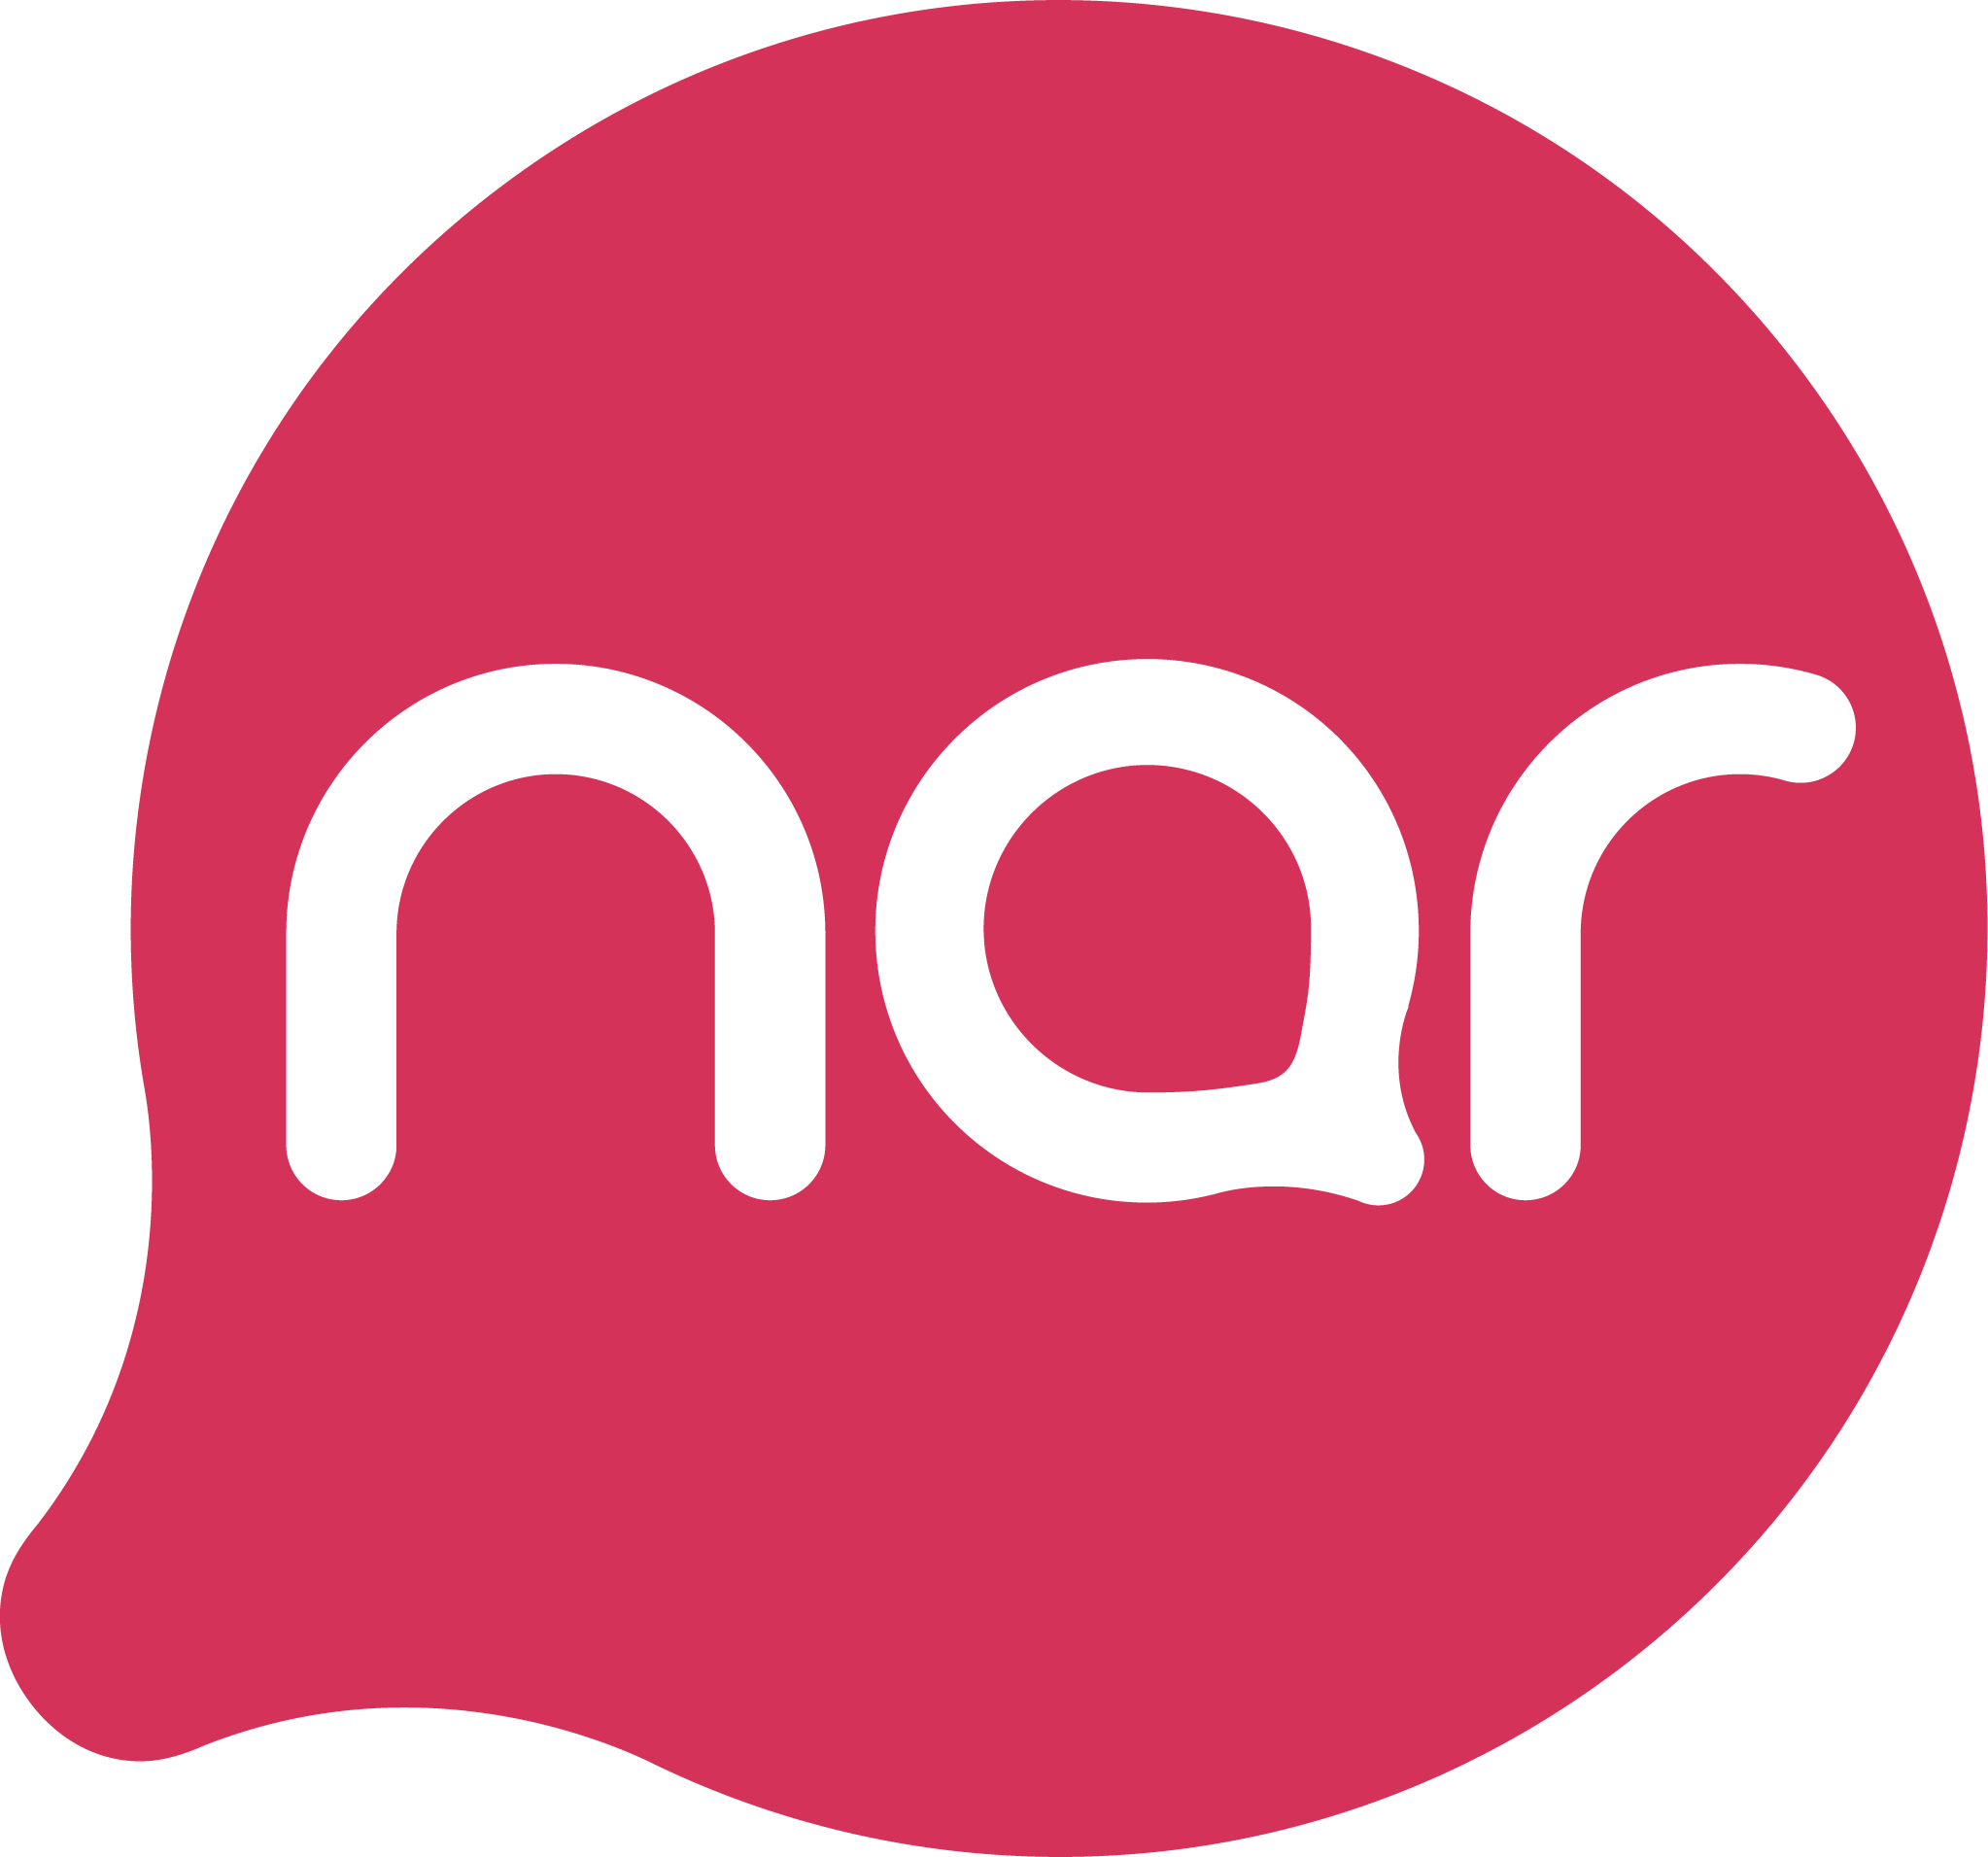 Nar protects customers from unwanted messages and automatic subscription